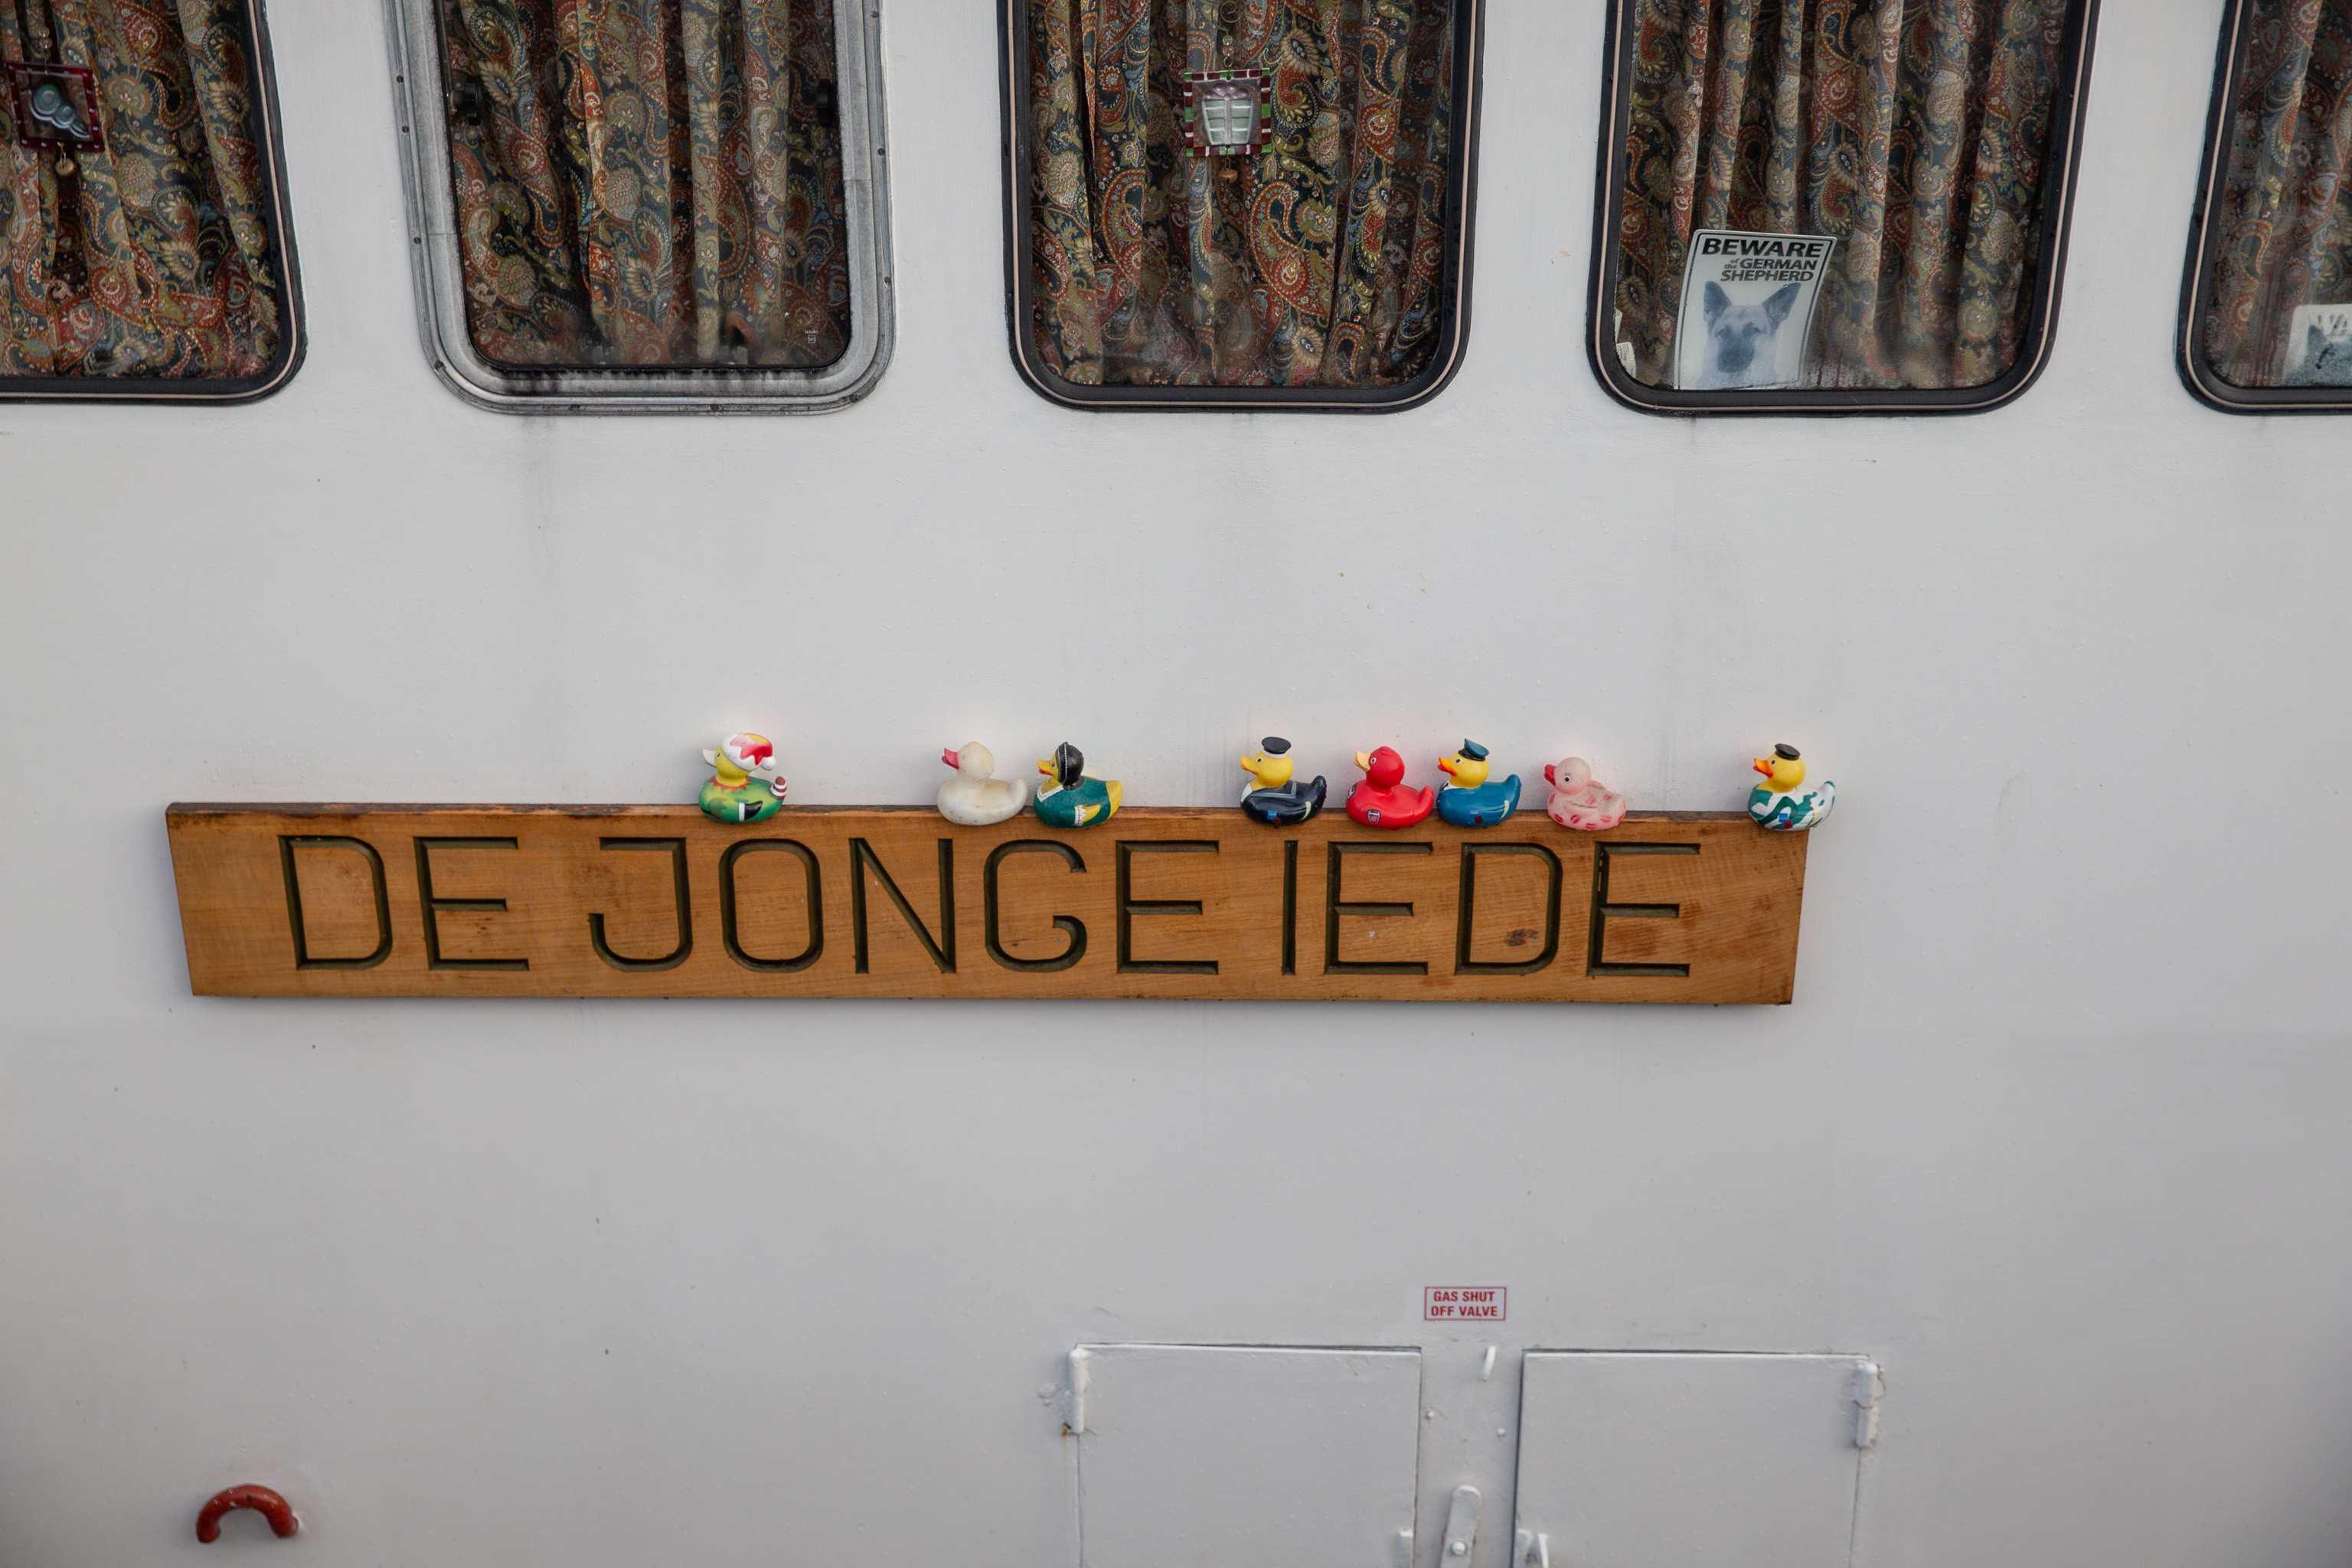 De Jonge Iede
Someone told me this meant "the young duck", but I can't confirm that. "de jonge eide" would apparently mean "the young egg" in Dutch, but Google T...